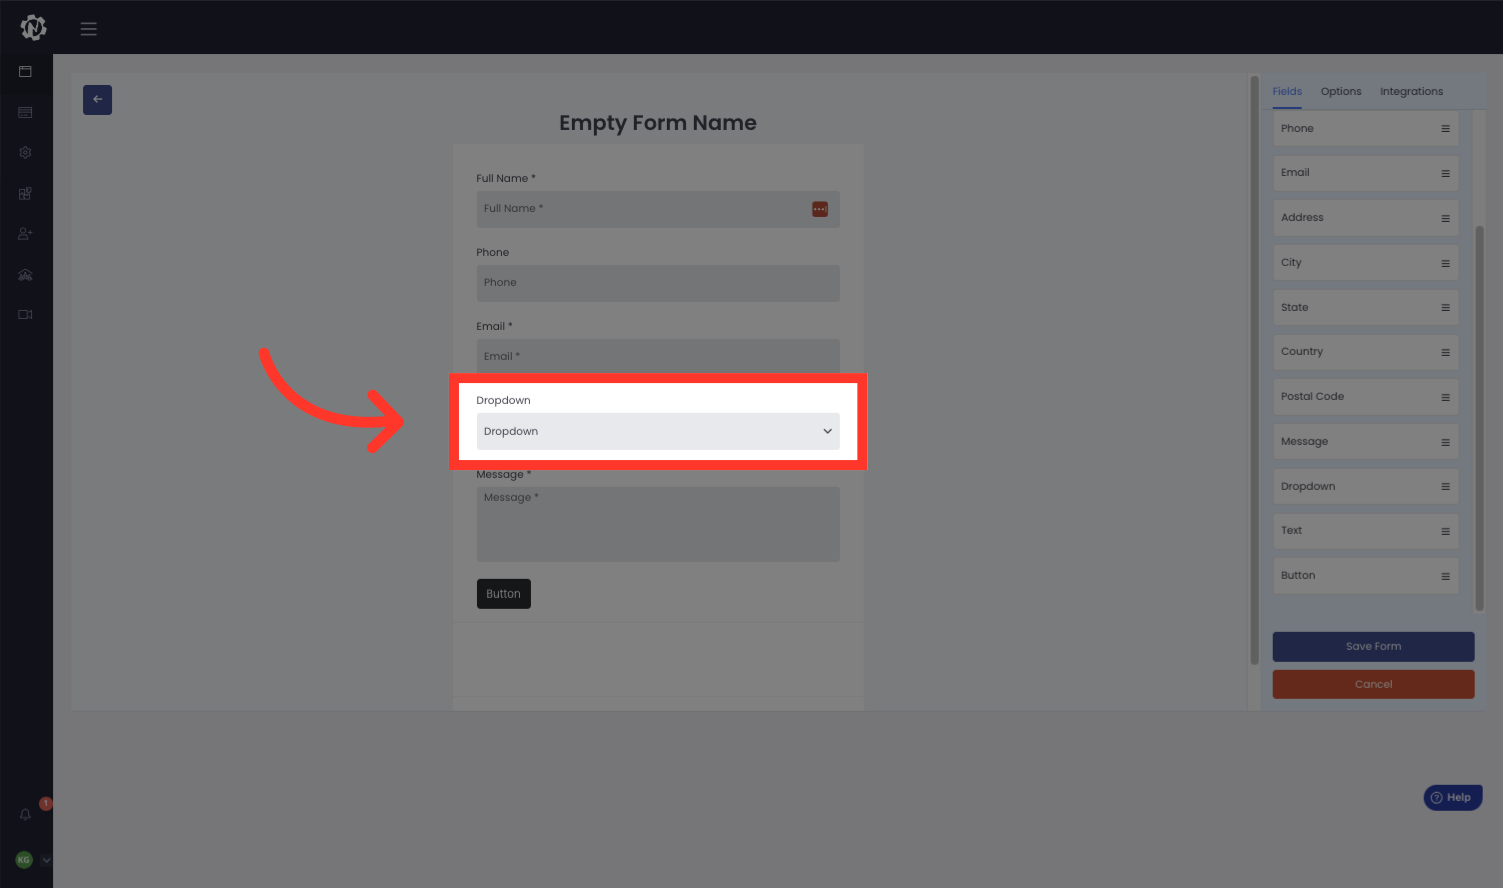 Lets get back to the dropdown and start adding options. Click on the Dropdown option on the form.